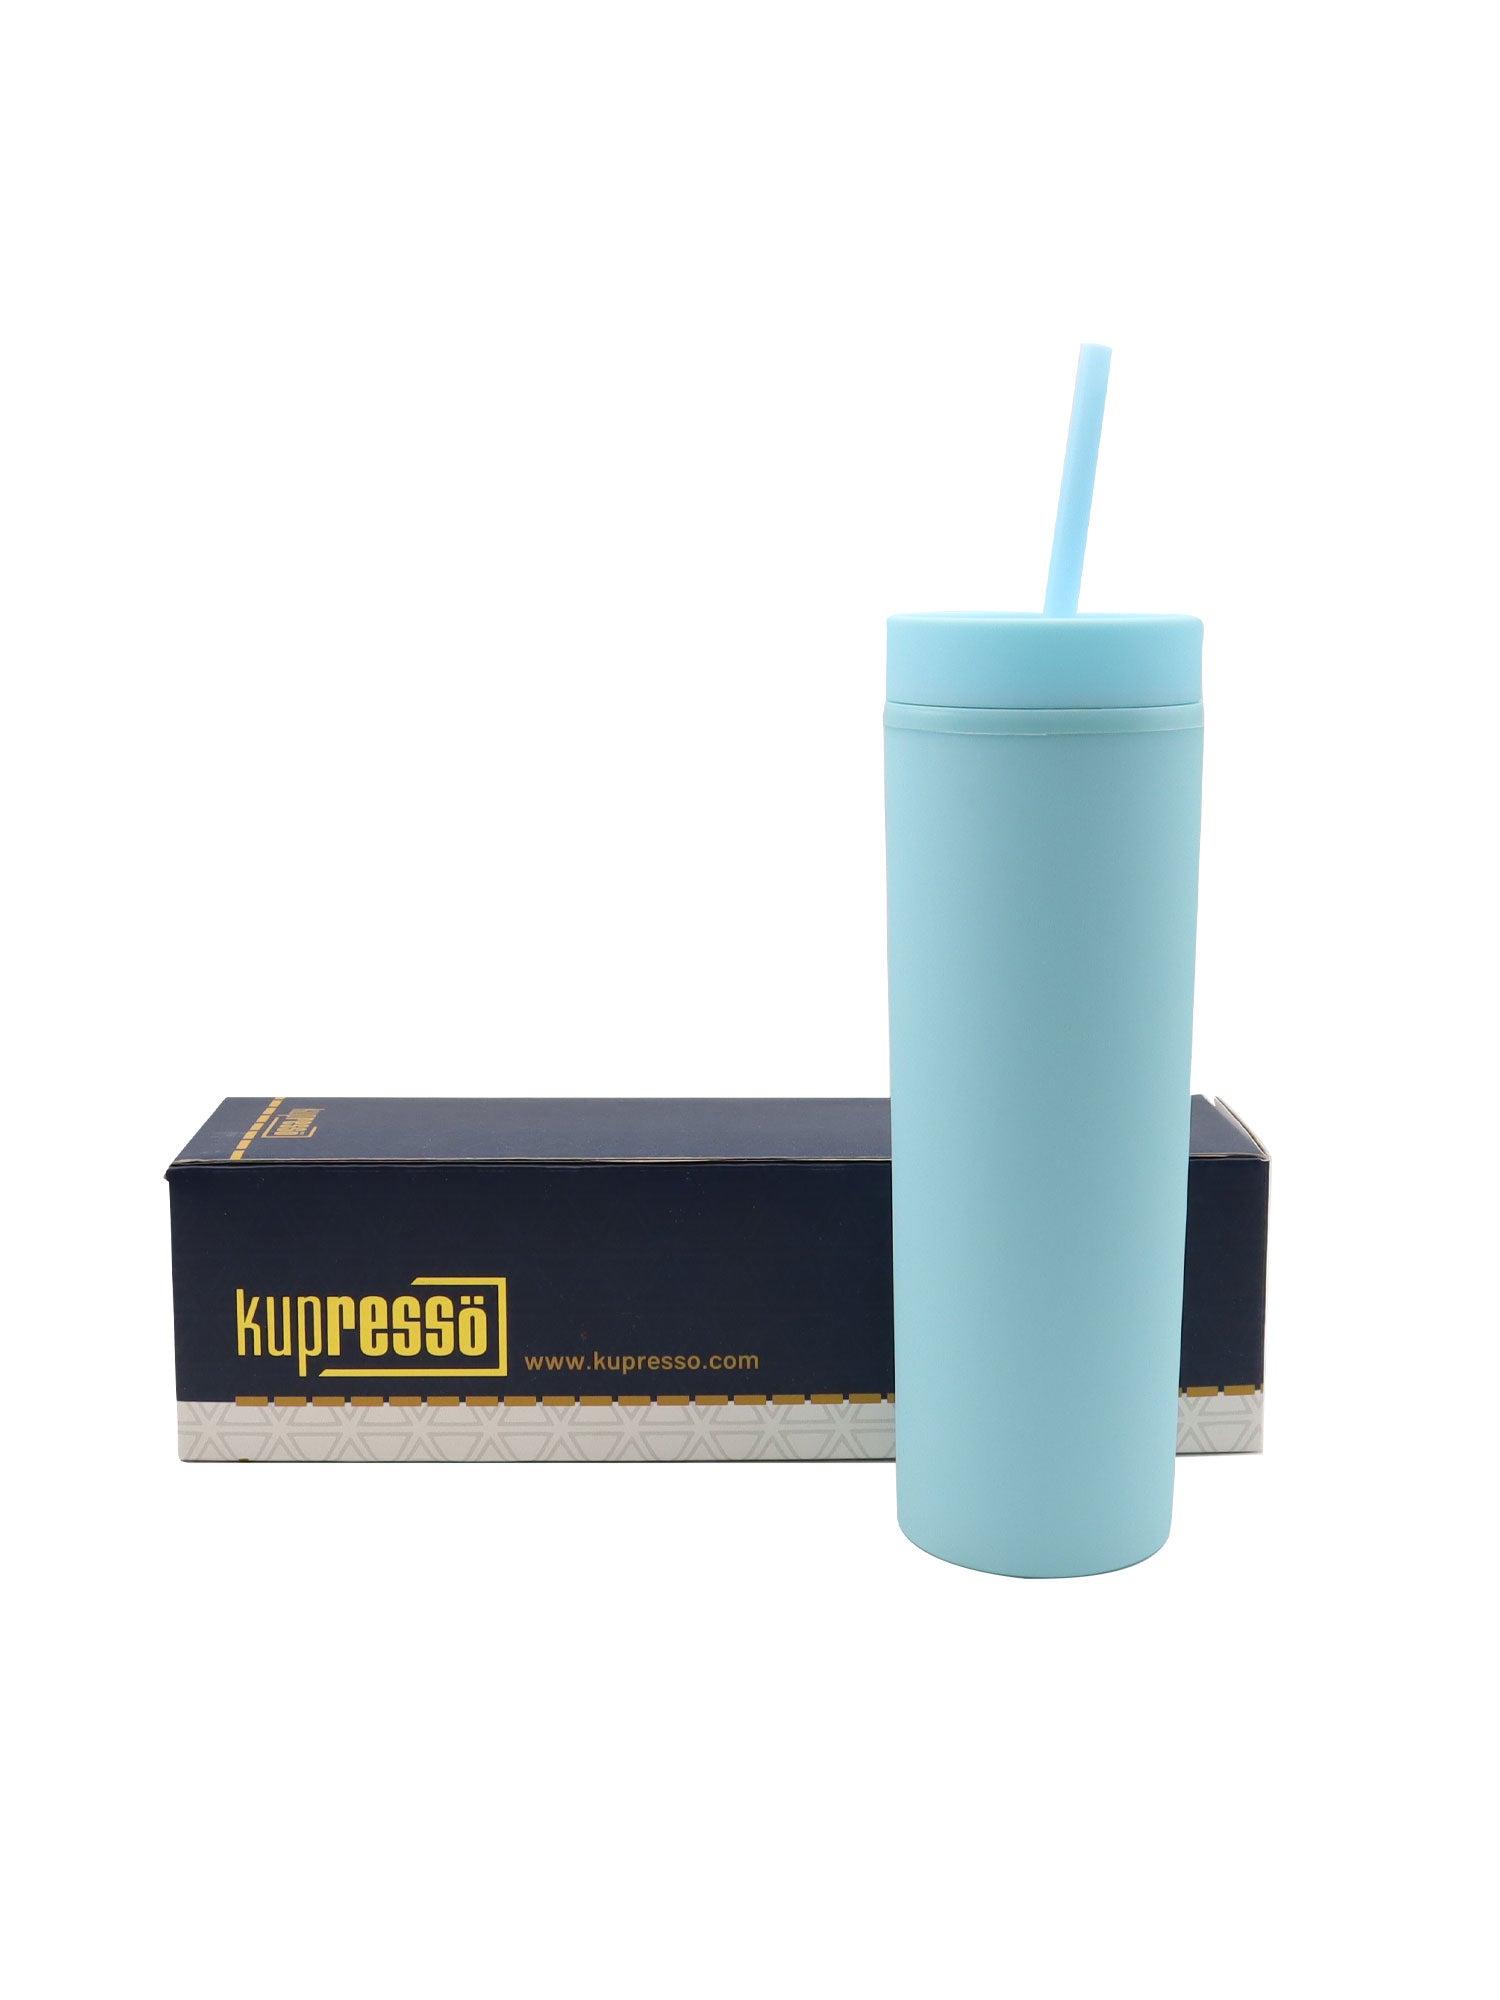 Wholesale 16oz/450ml Skinny Matte Acrylic Tumblers with Lid and